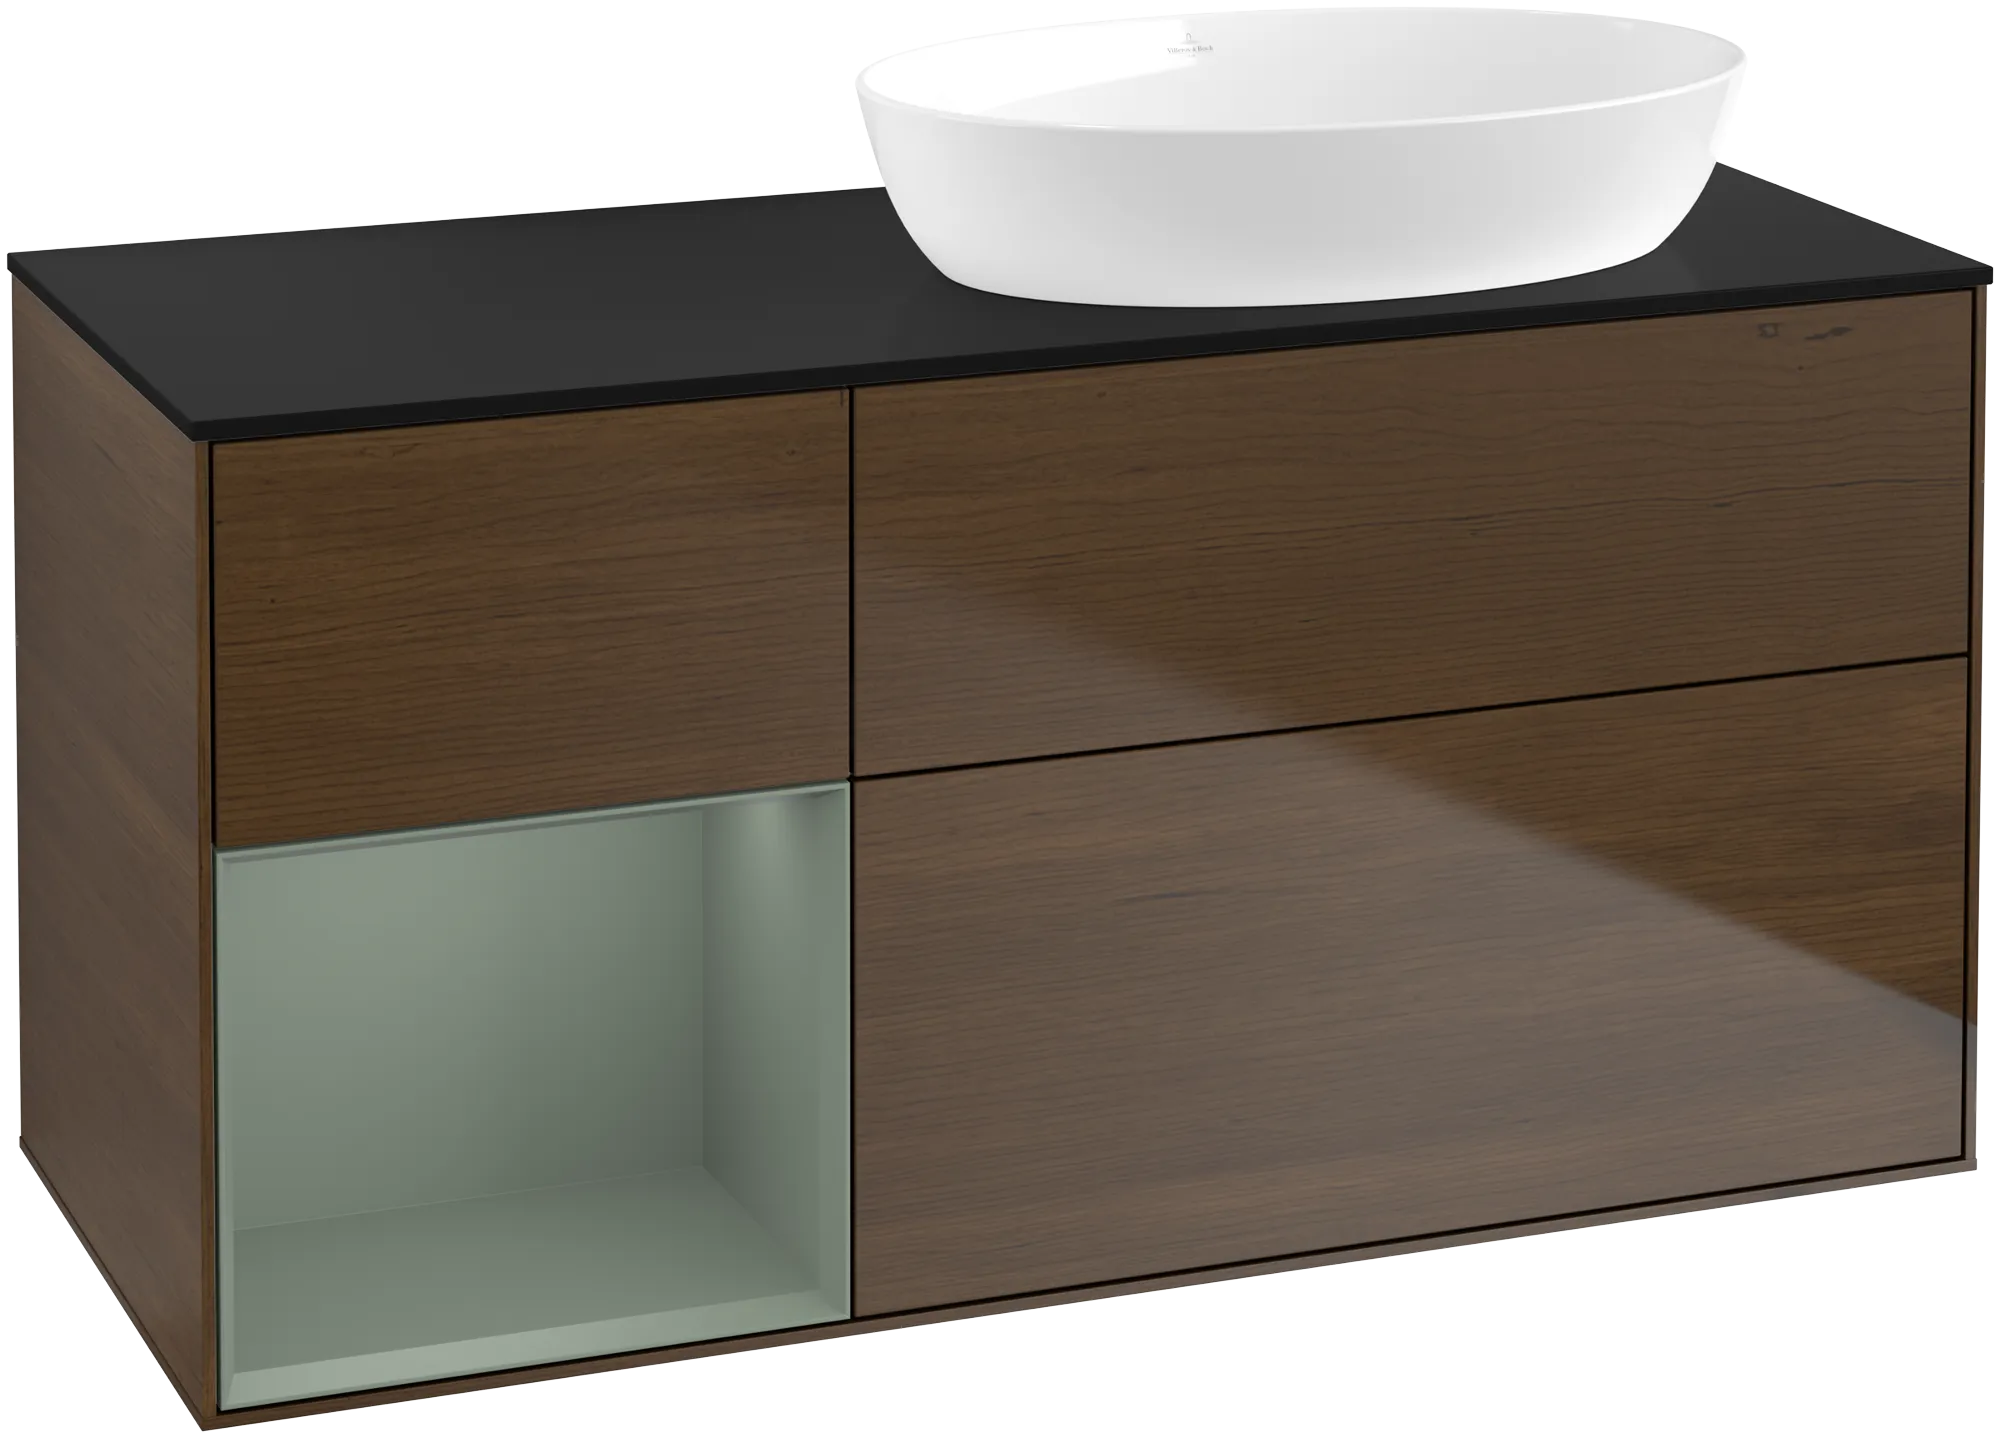 Picture of VILLEROY BOCH Finion Vanity unit, with lighting, 3 pull-out compartments, 1200 x 603 x 501 mm, Walnut Veneer / Olive Matt Lacquer / Glass Black Matt #FA42GMGN